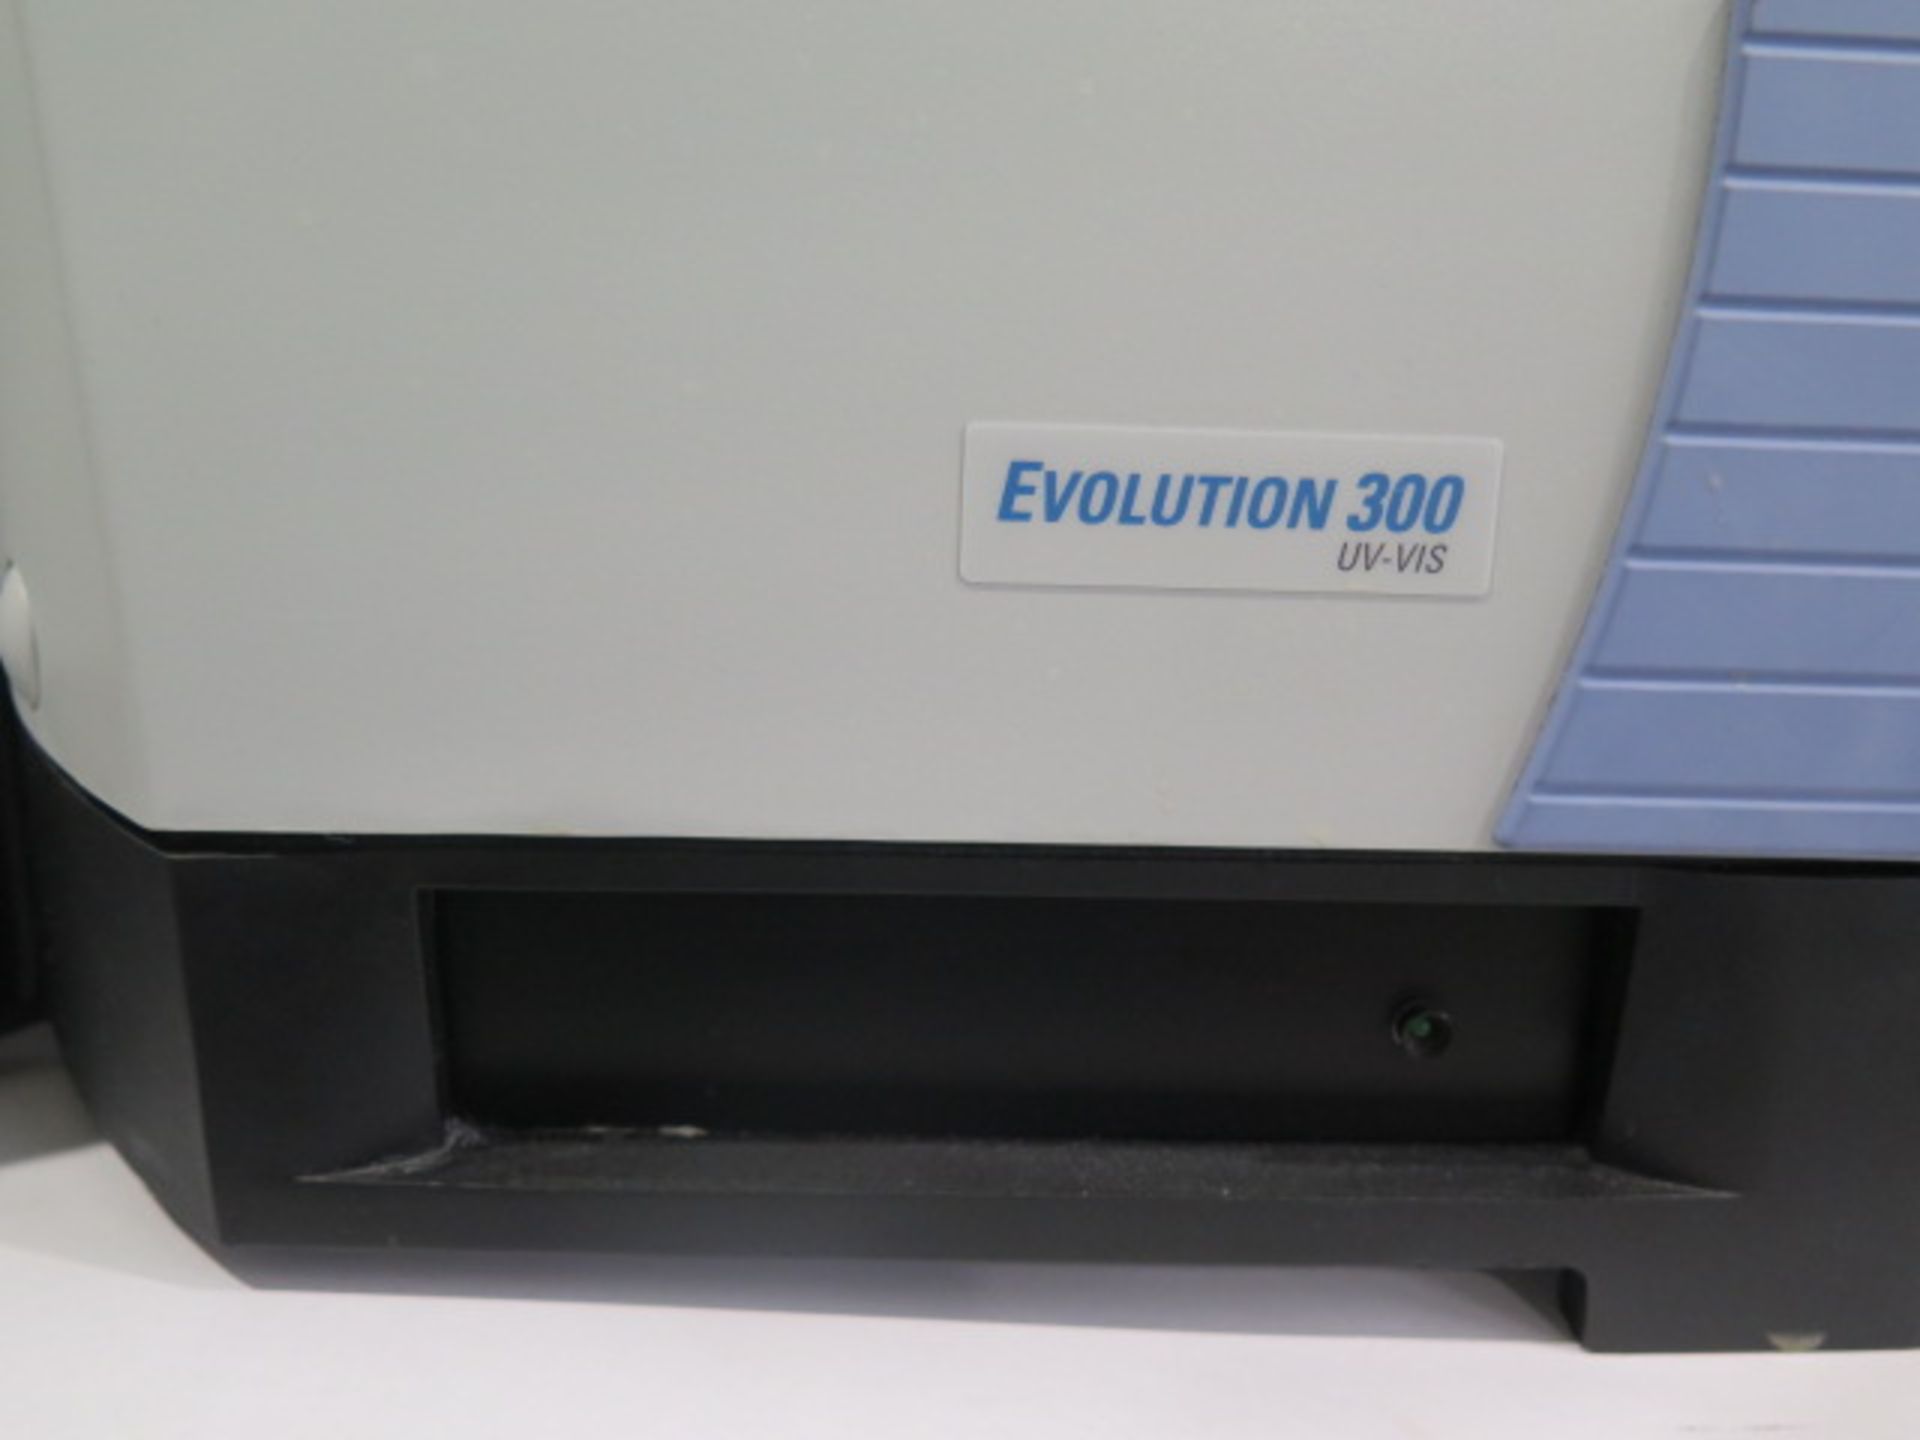 Thermo Scientific Evolution 300 UV-VIS Spectrophotometer s/n EVOW176001 (SOLD AS-IS - NO WARRANTY) - Image 8 of 10